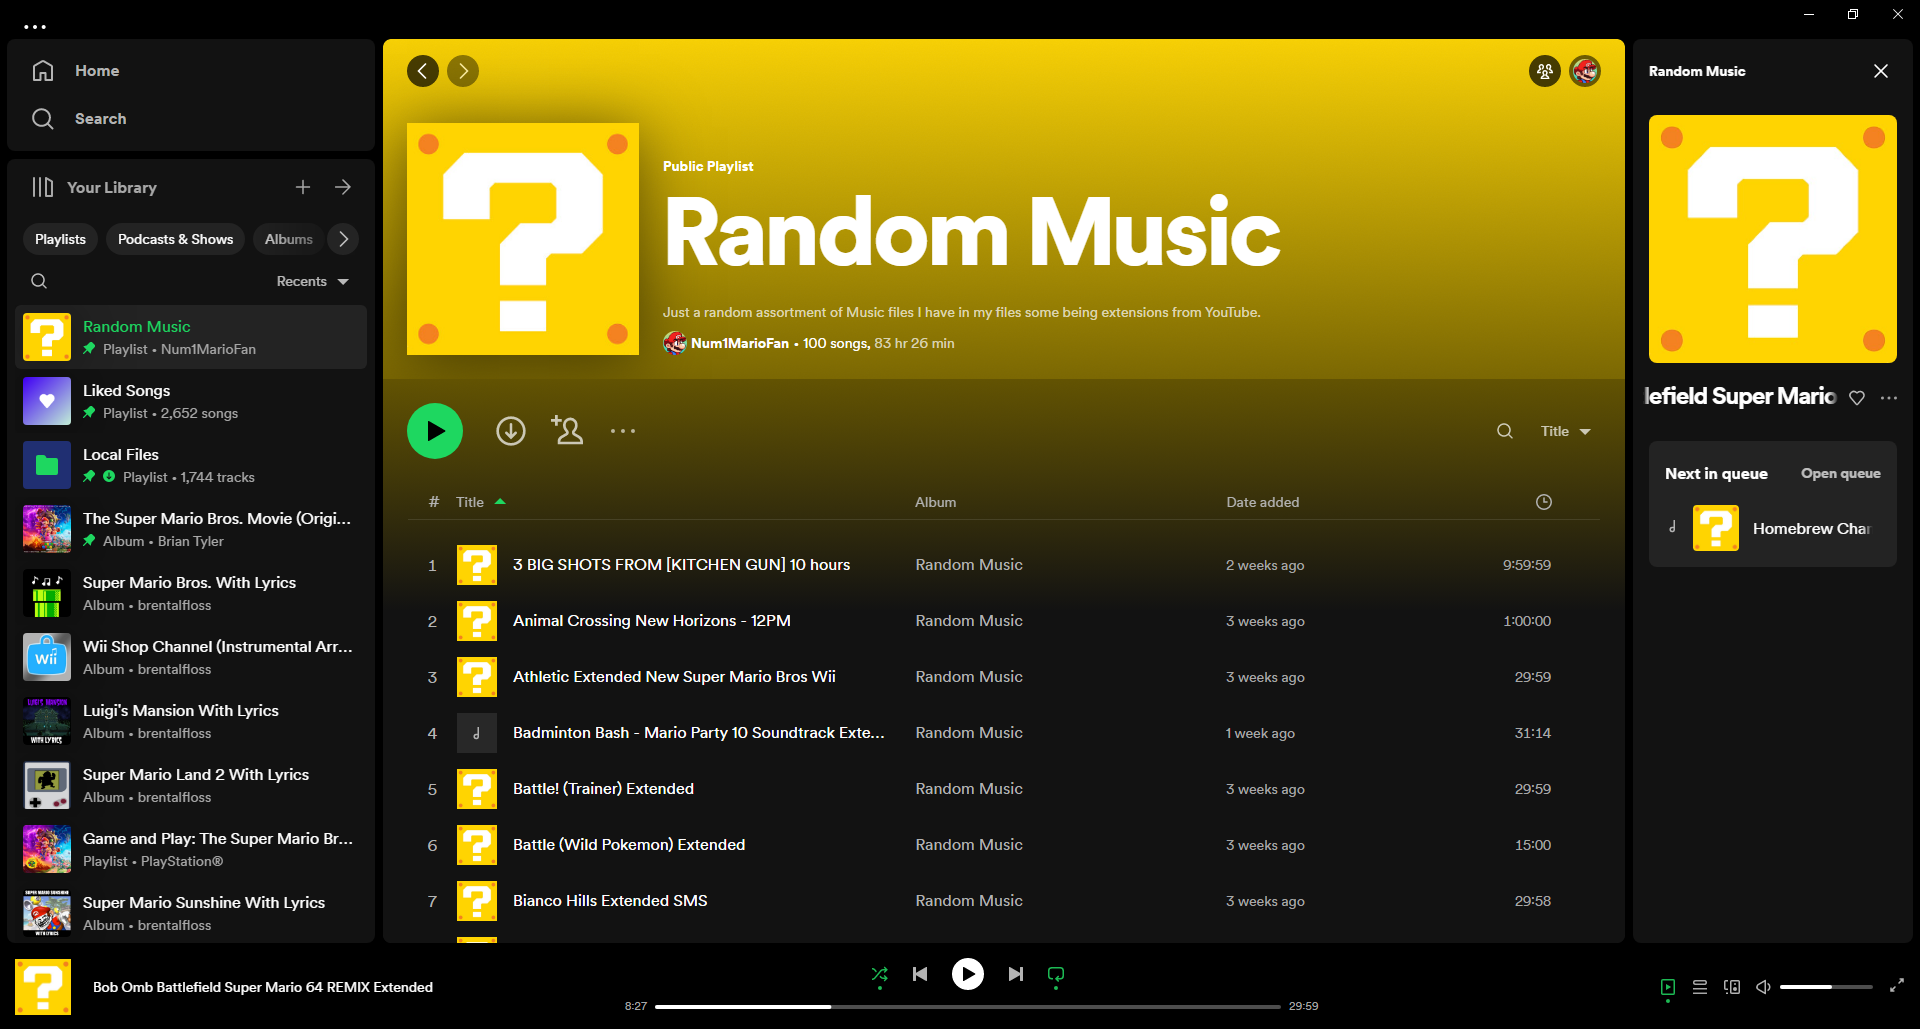 Solved: What's up with this new desktop UI? - The Spotify Community